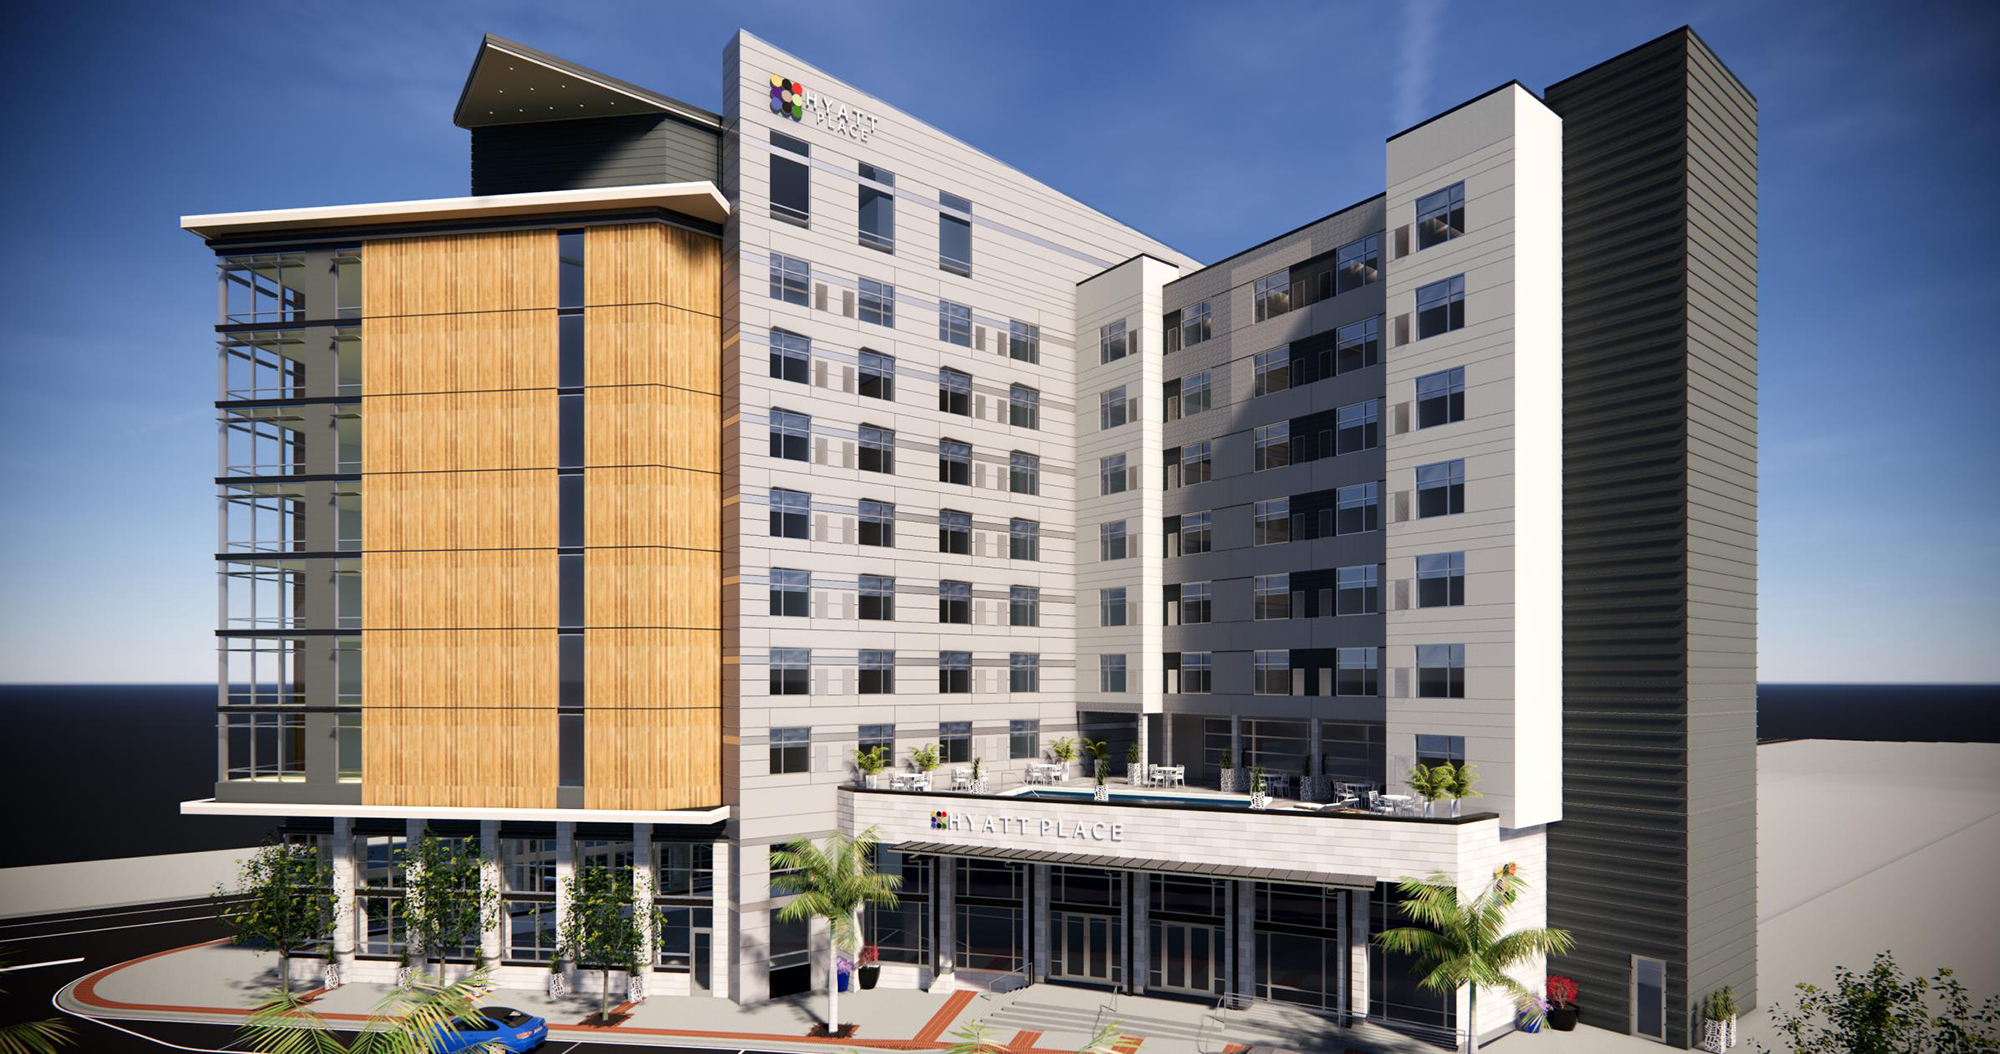 Hyatt Place Downtown is planned on a quarter-acre at Water and Hogan streets.